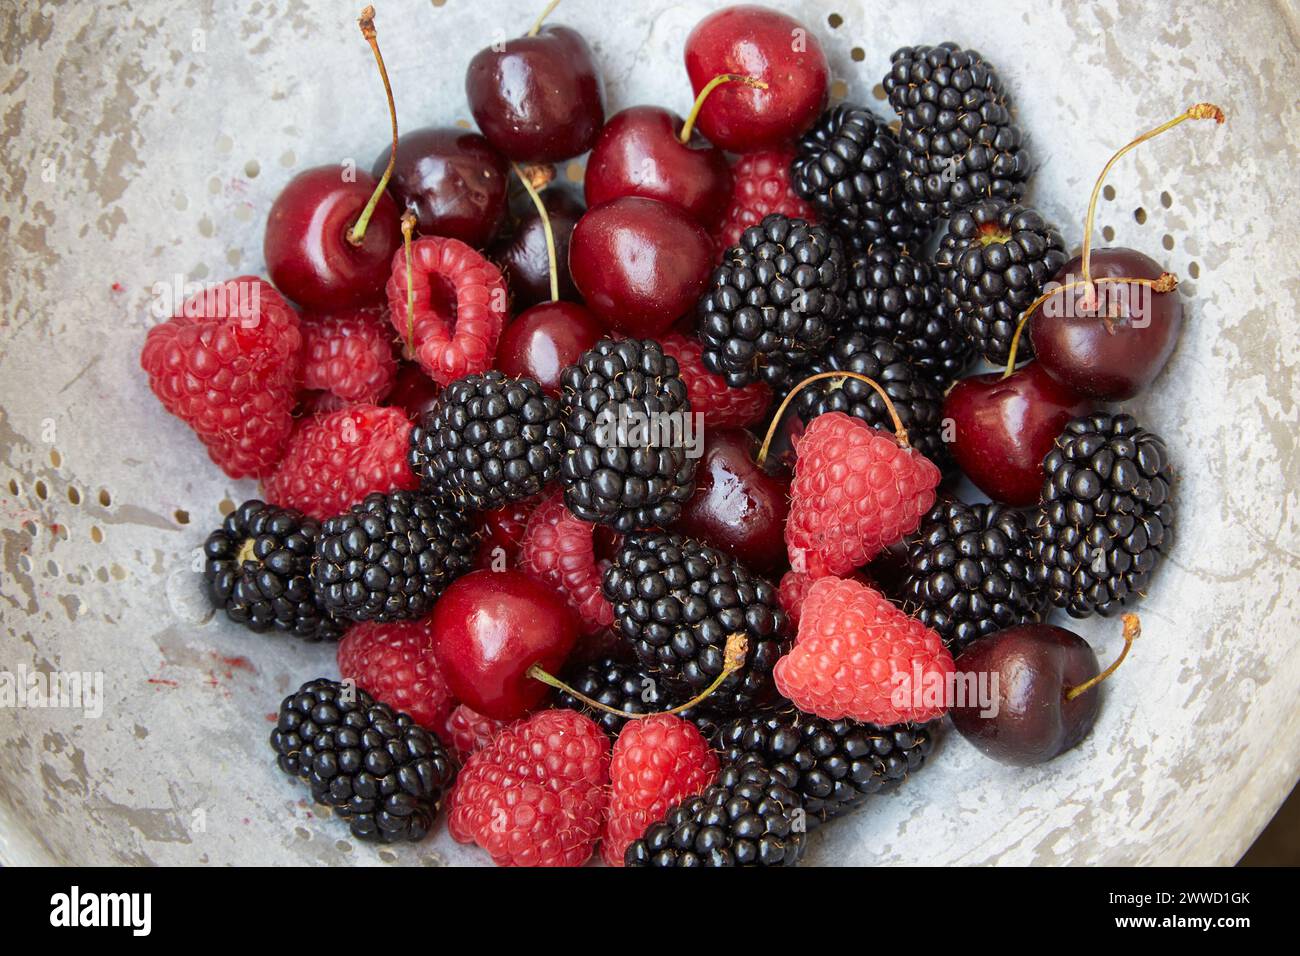 Mixed Berries in an Aluminum Strainer Stock Photo